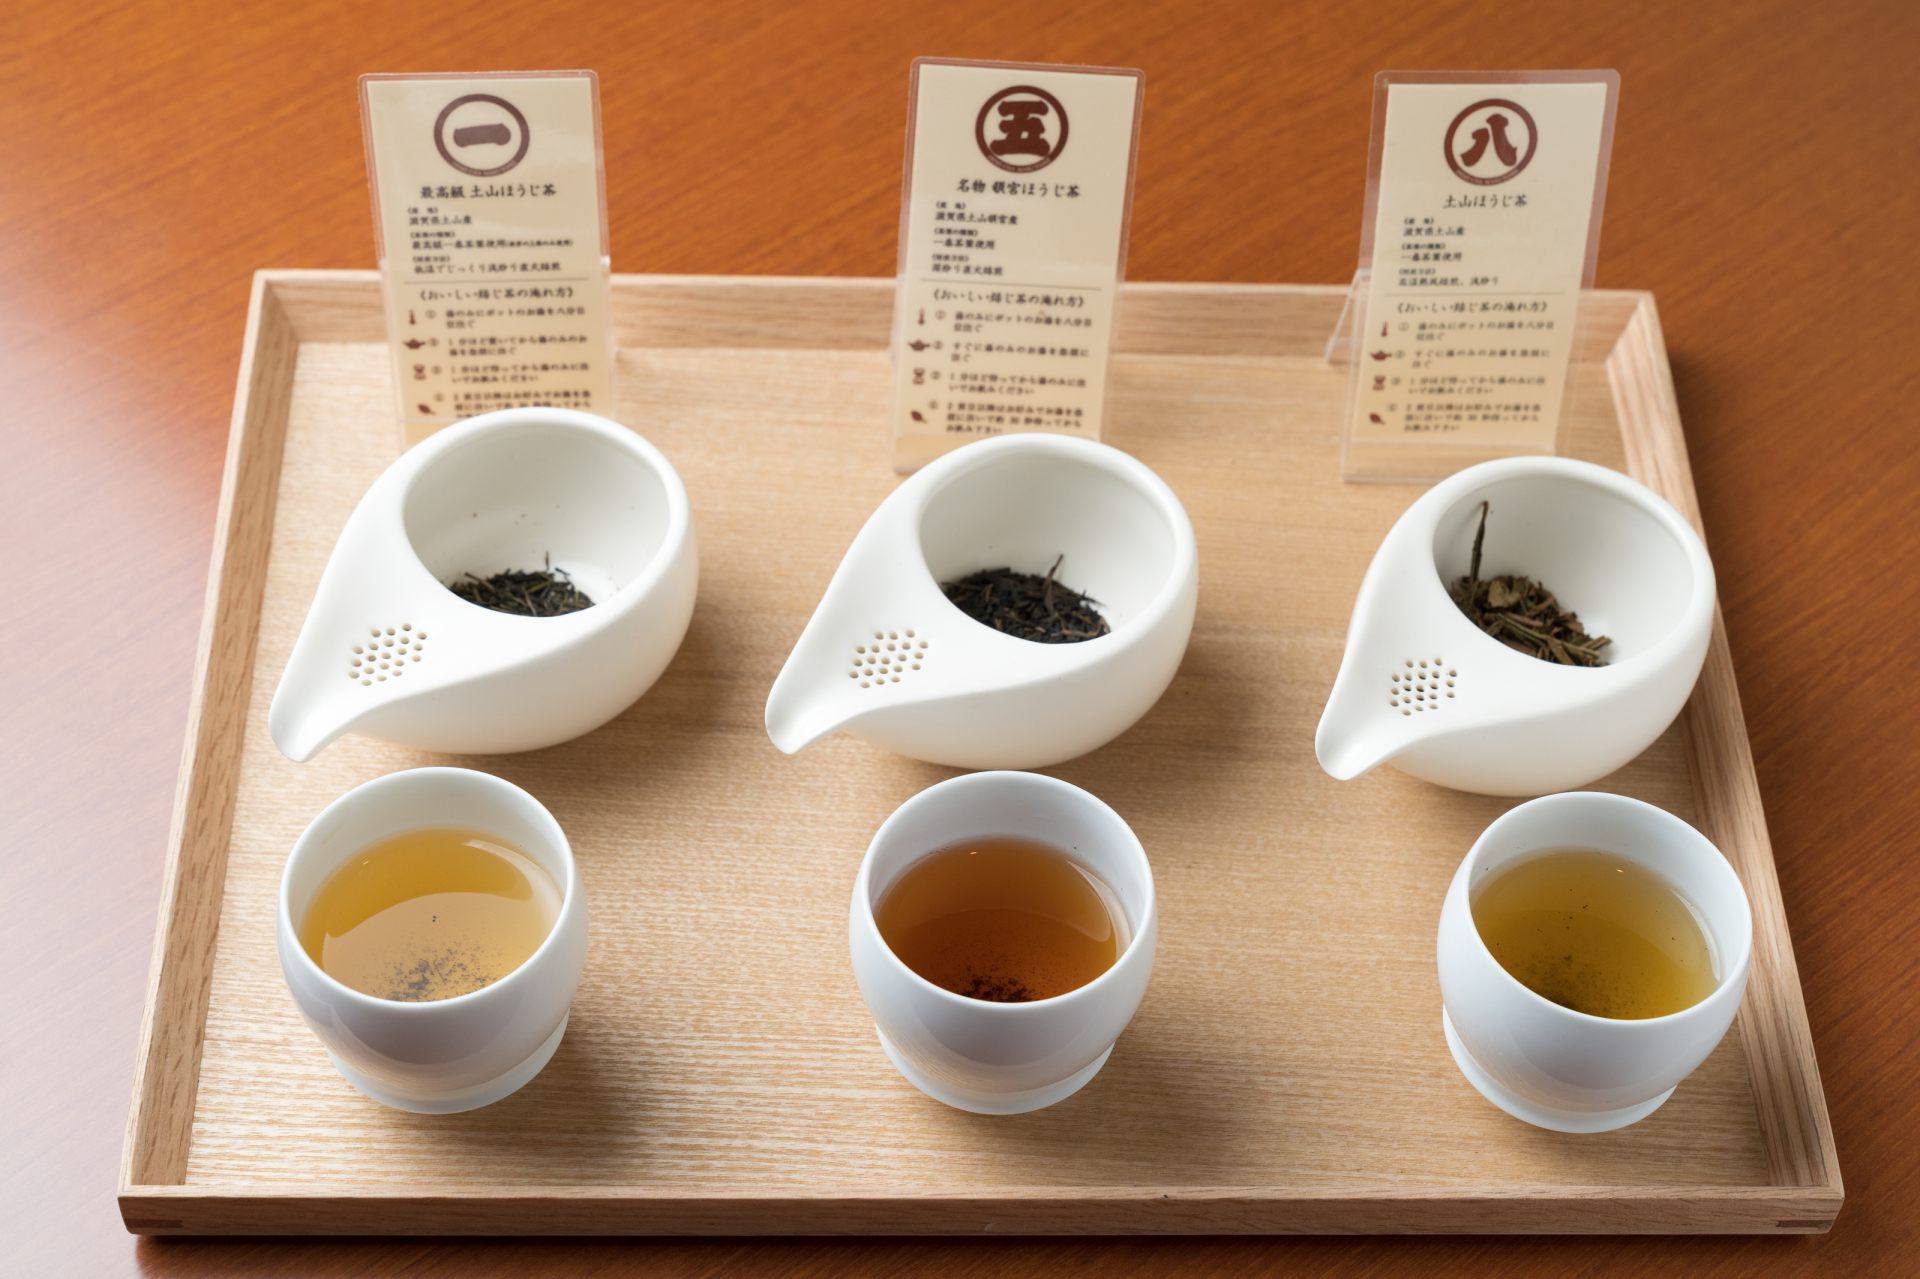 Experience the intricacies of roasted green tea through its diverse colors, aroma, and flavors through the tasting experience.